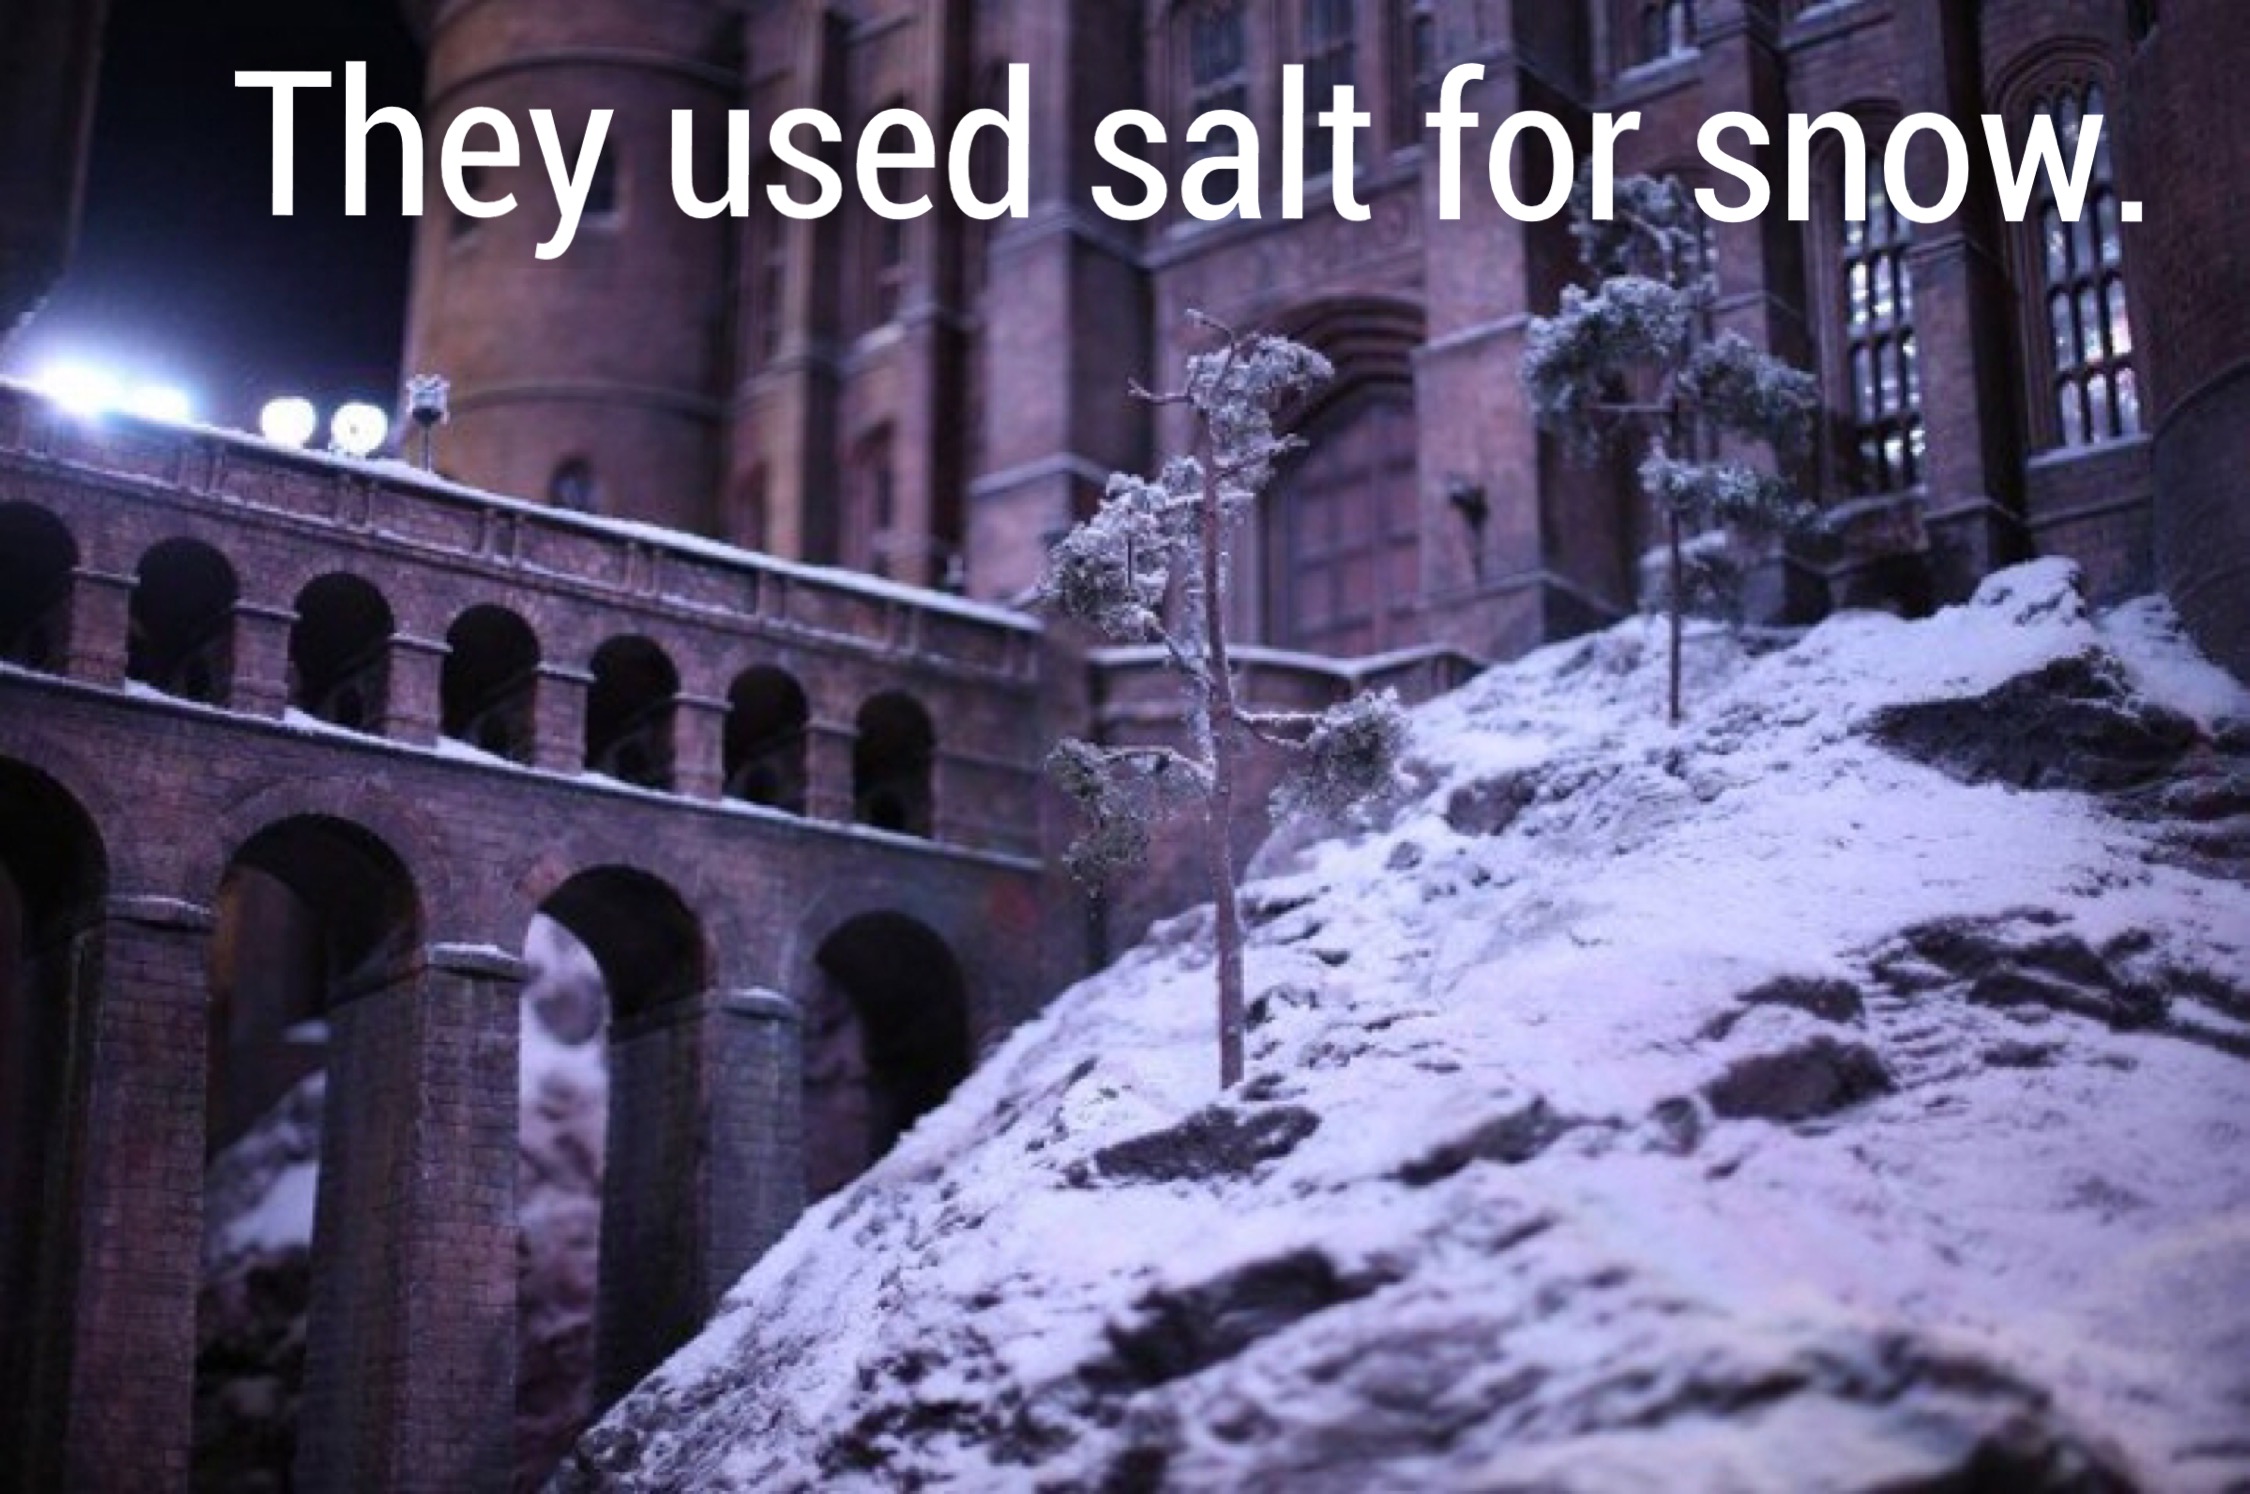 harry potter world london christmas - They used salt for snow.